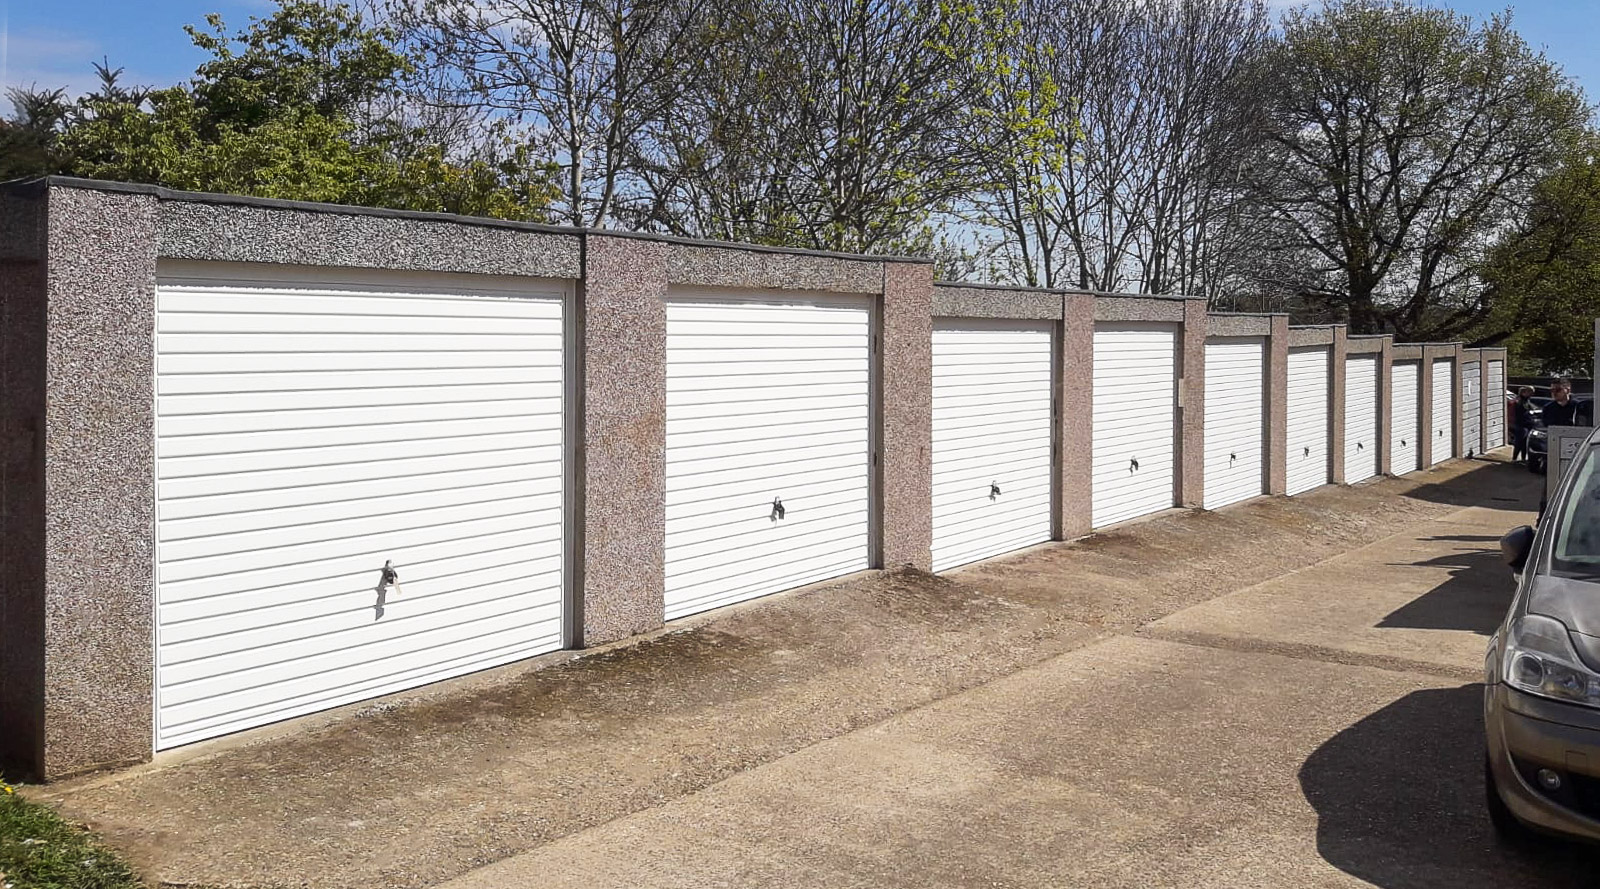 A row of 9 Hormann 2002 Horizontal Up and Over Garage Doors